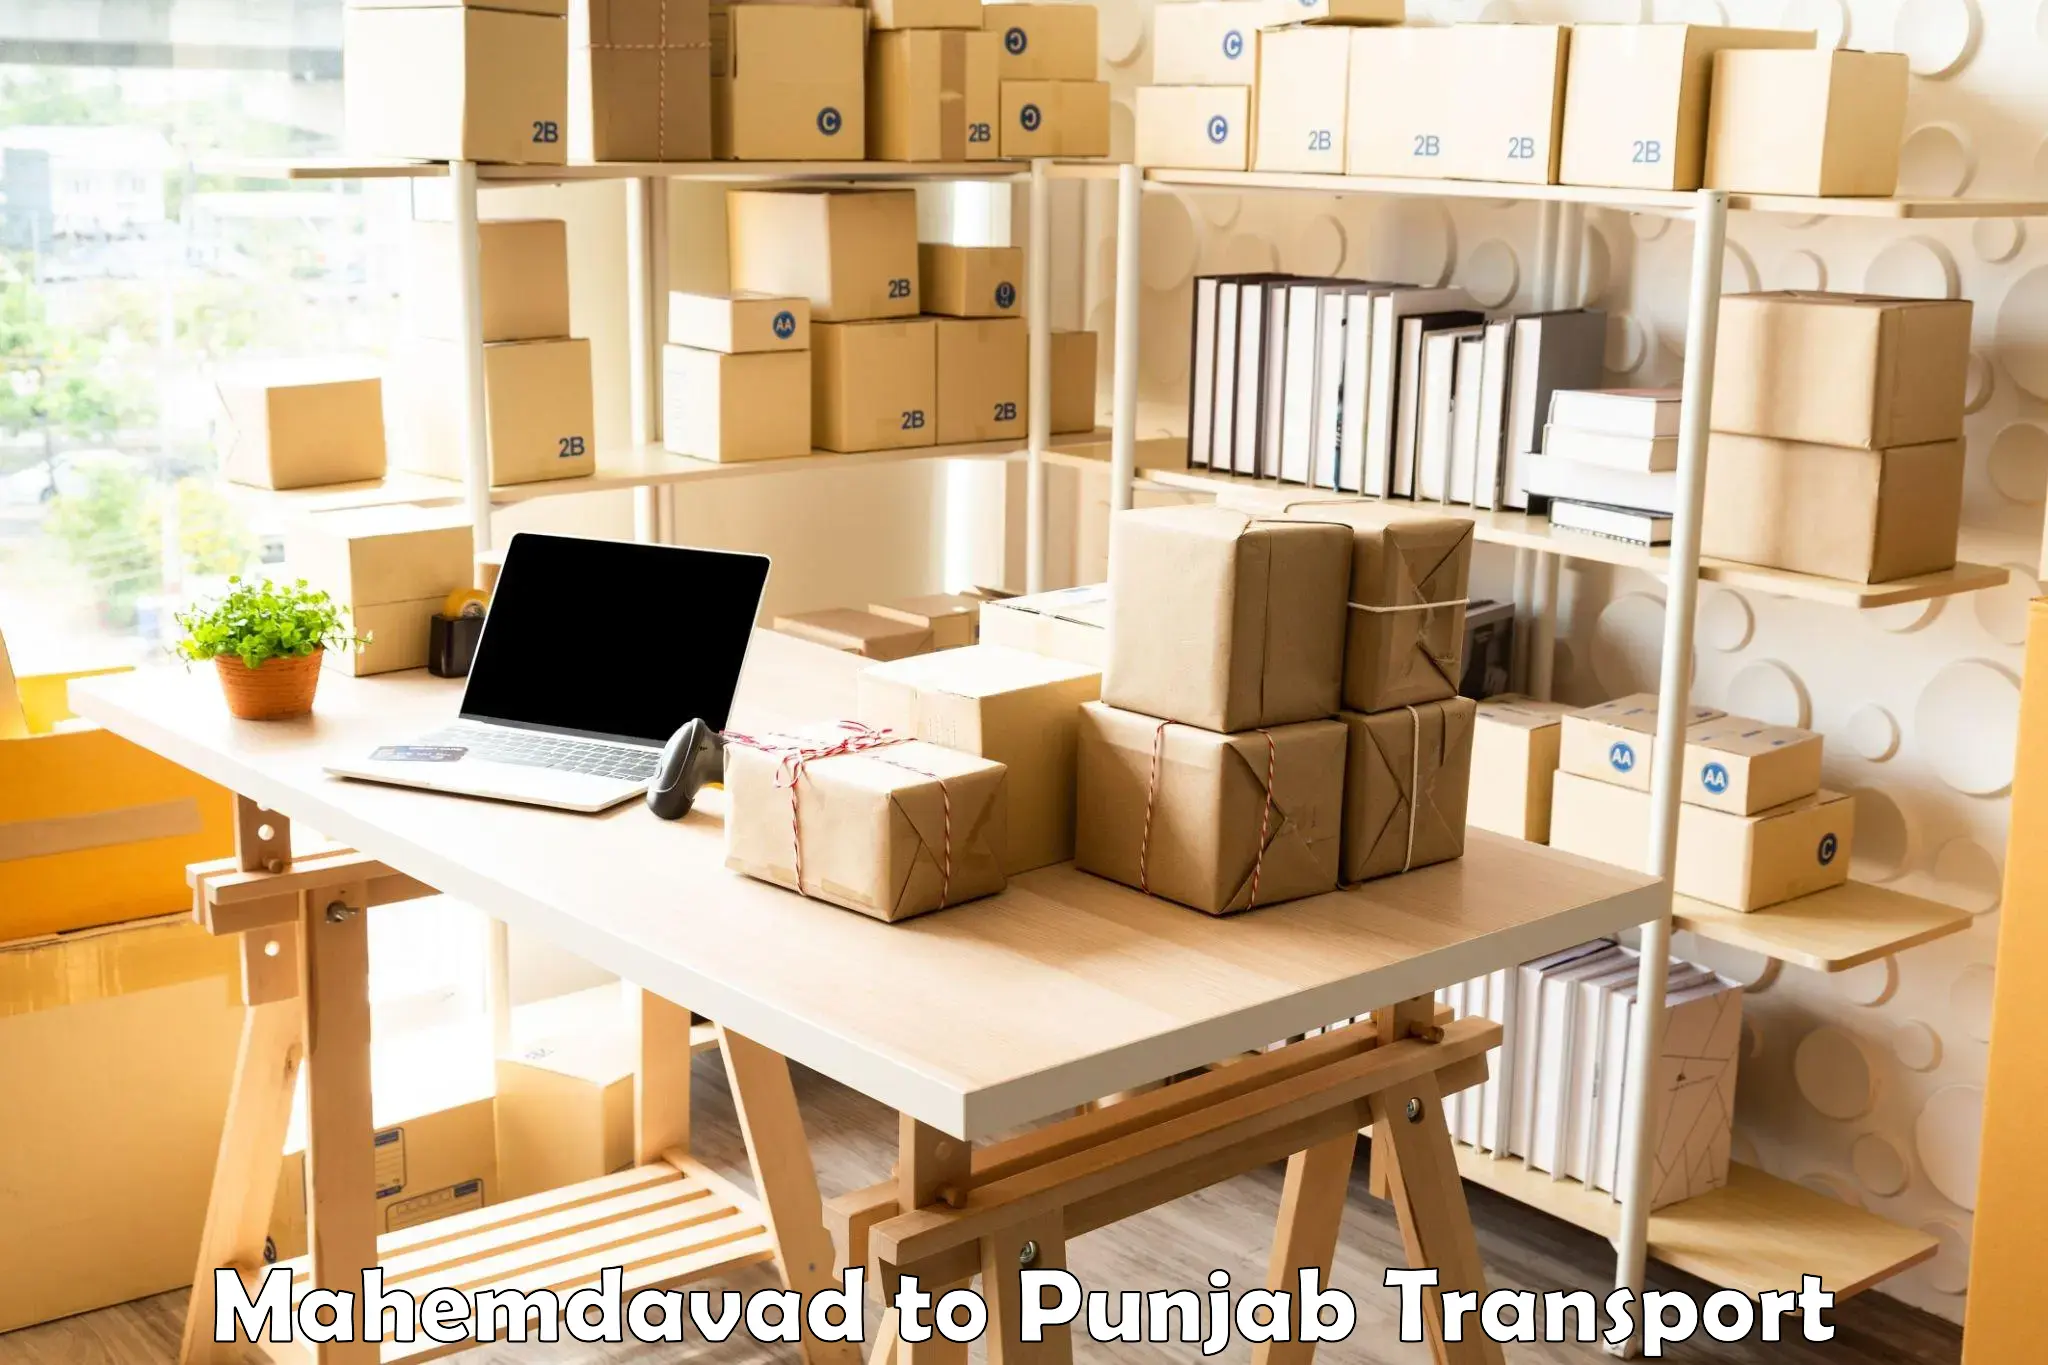 Container transportation services Mahemdavad to Punjab